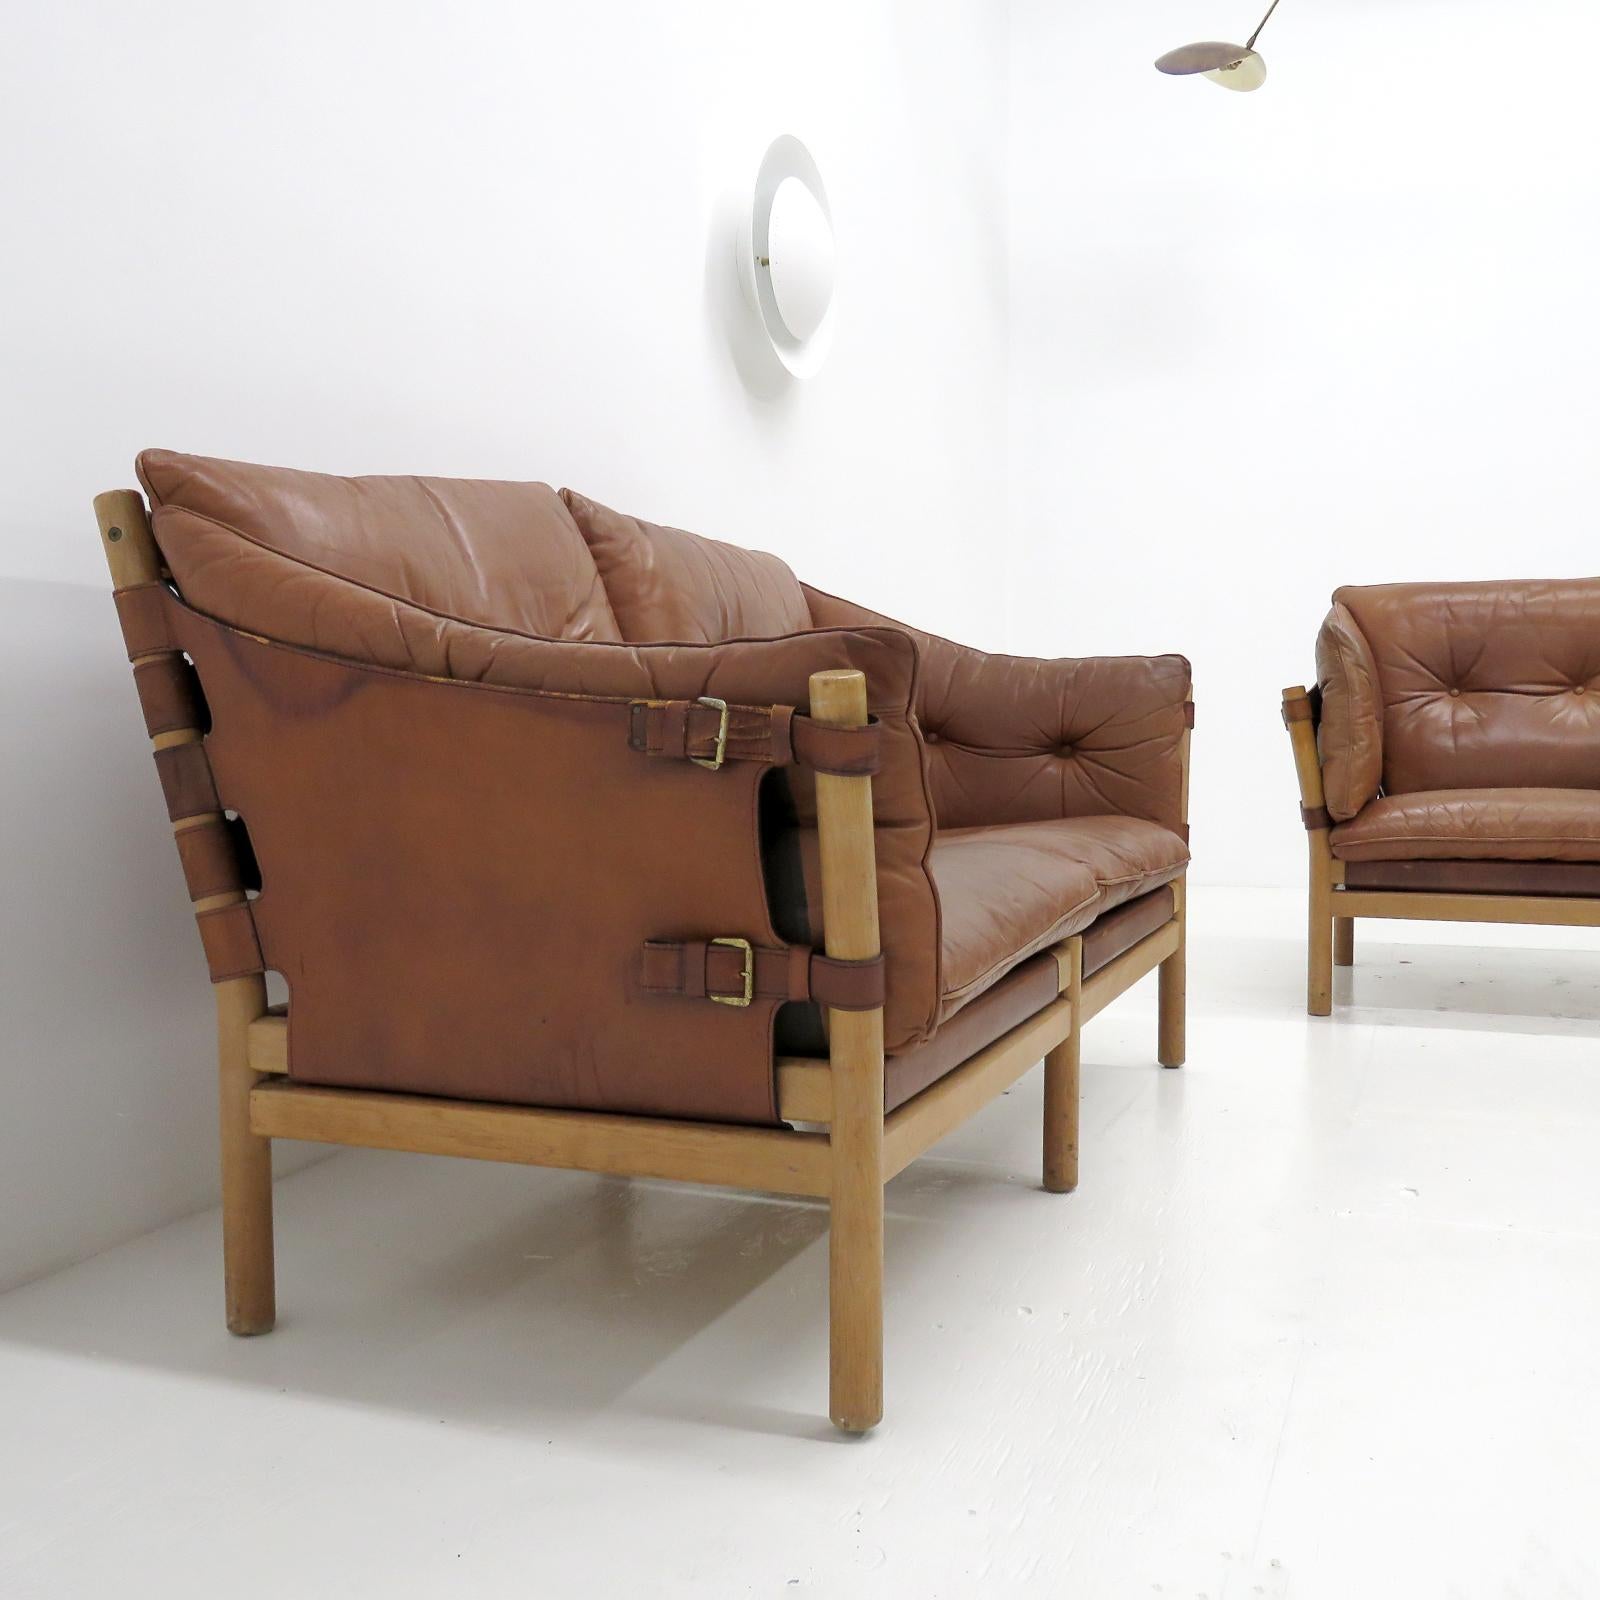 Leather Settee Model ‘Ilona’ by Arne Norell, 1960 For Sale 2